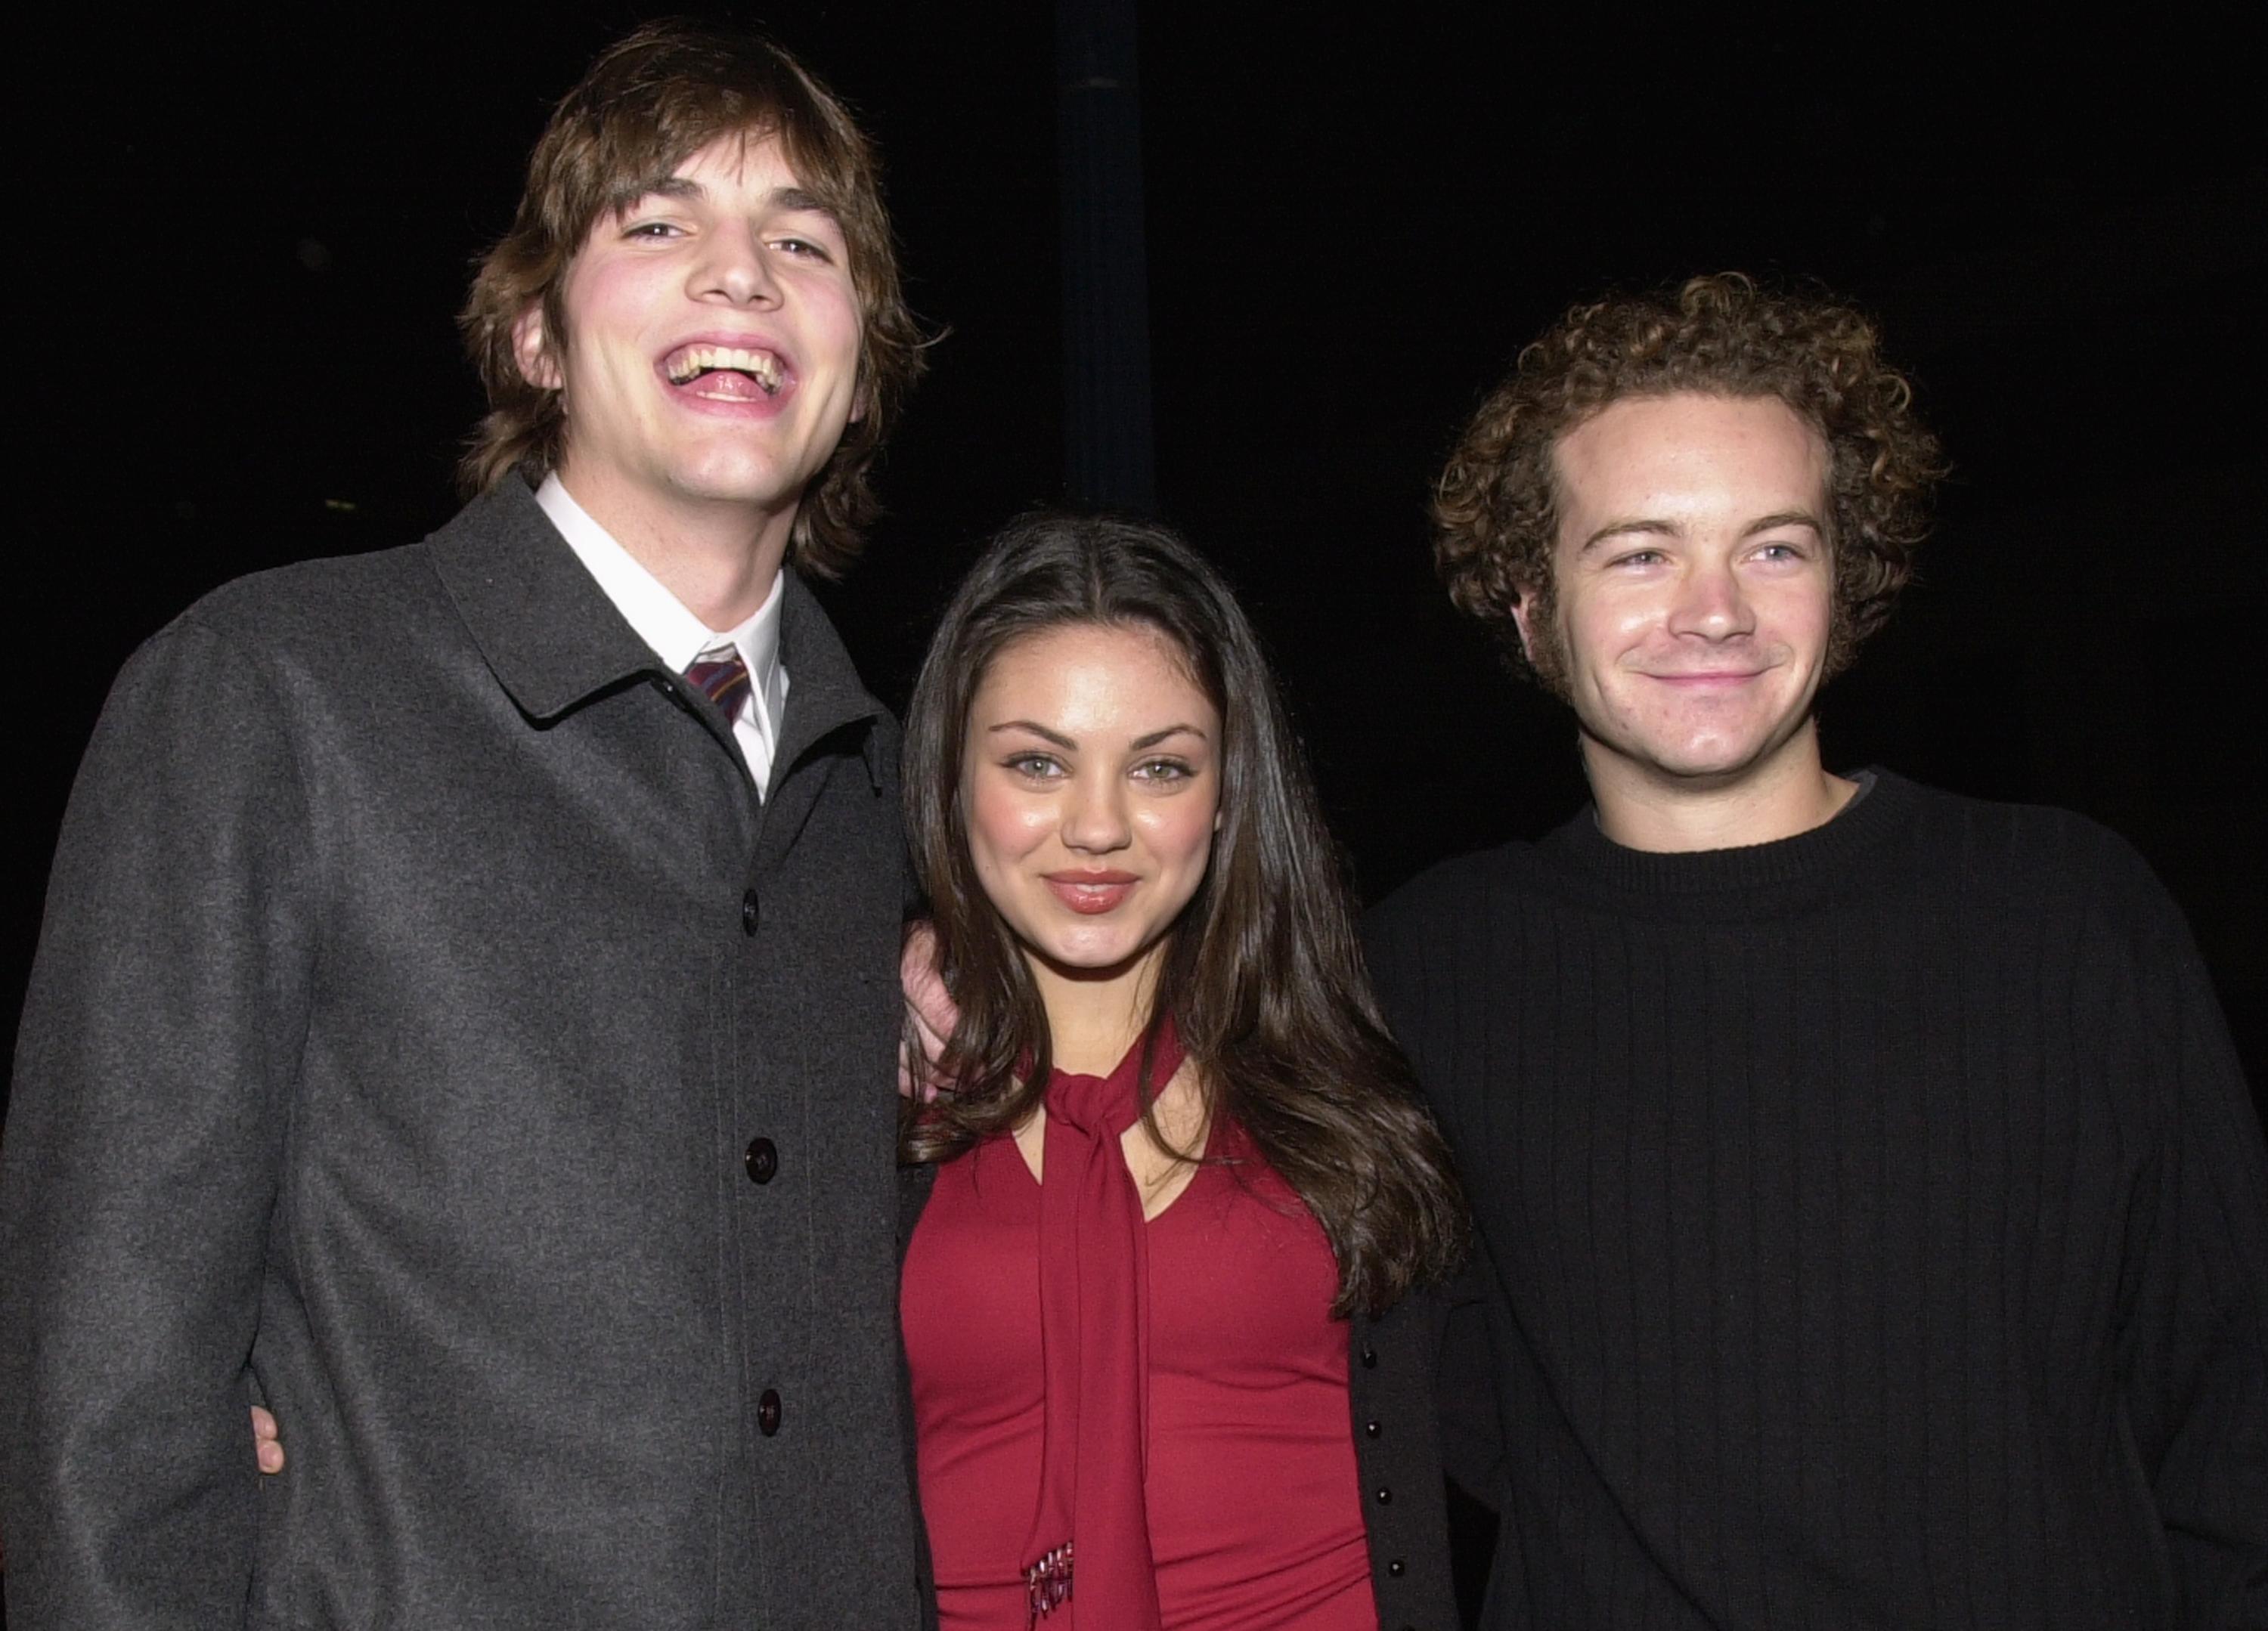 Ashton Kutcher, Mila Kunis, and Danny Masterson at the premiere of USA Films' "Traffic" on December 14, 2000 in Beverly Hills. | Source: Getty Images